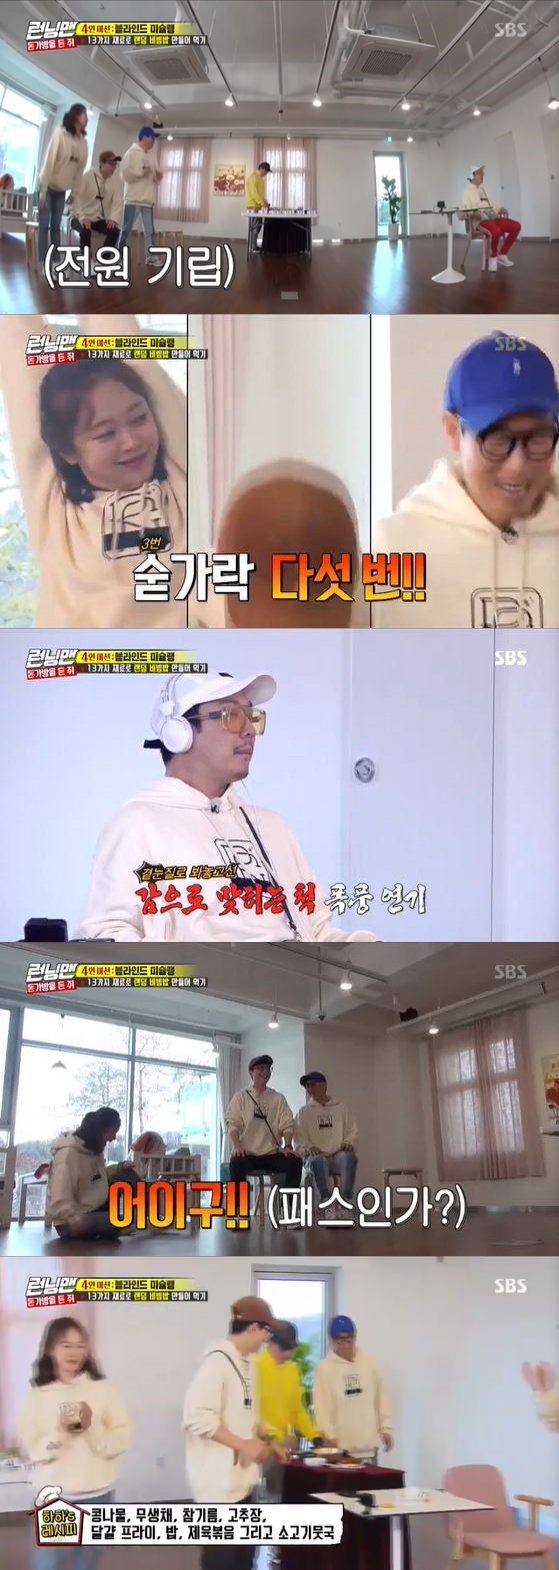 Jung So-min laughed with cute Ricky at the bibimbap making mission.On the 26th, SBS Weekend, Running Man, was selected to make bibimbap by selecting 13 ingredients.Haha randomly controlled the amount without seeing the ingredients of bibimbap as Lee Kwang-soo and Yoo Jae-Suk Jung So-min watched.However, the production team who felt something strange in the appearance of Haha, who picked up the ingredients such as bean sprouts, kimchi and eggs, felt Ricky.The members set a secret signal before the commission, saying that Haha ha happens if it is good material and does not happen if it is bad material.Haha showed a stormy performance when he saw the members who stood up when he picked eggs with his side eyes and shouted 5 times.Soon, PD tried to stop Ricky, saying, From now on, we prohibit you from standing up. But now that only the last source is ahead, the members are in a situation where the Wasabi sauce takes place.Jung So-min then pretended to fall down deliberately and gave Haha a half-hearted pass hint to avoid Wasabi, then the crisis of chocosyrup.Jung So-min suddenly jumped out, saying, The toilet seems to be urgent. He gave another Ricky and caused a laugh.Members who avoided all these bad ingredients were able to easily commission with delicious bibimbap.On the other hand, in 2020, the members started their first broadcast with the New Years Day and greeted them with a new look.In particular, Jung So-min was happy with the news that this years relationship appears in the New Years Day.Yang Se-chan, on the contrary, laughed with the words There will be no money and no women this year.The biggest winner of the mission, which was played with four VS snakes of the New Years Running Man 4, was Haha, who was a snake team with Song Ji-hyo, Ji Suk-jin and Yoo Jae-Suk.They delivered the prize money to the production crew, saying, Lets have a dinner.